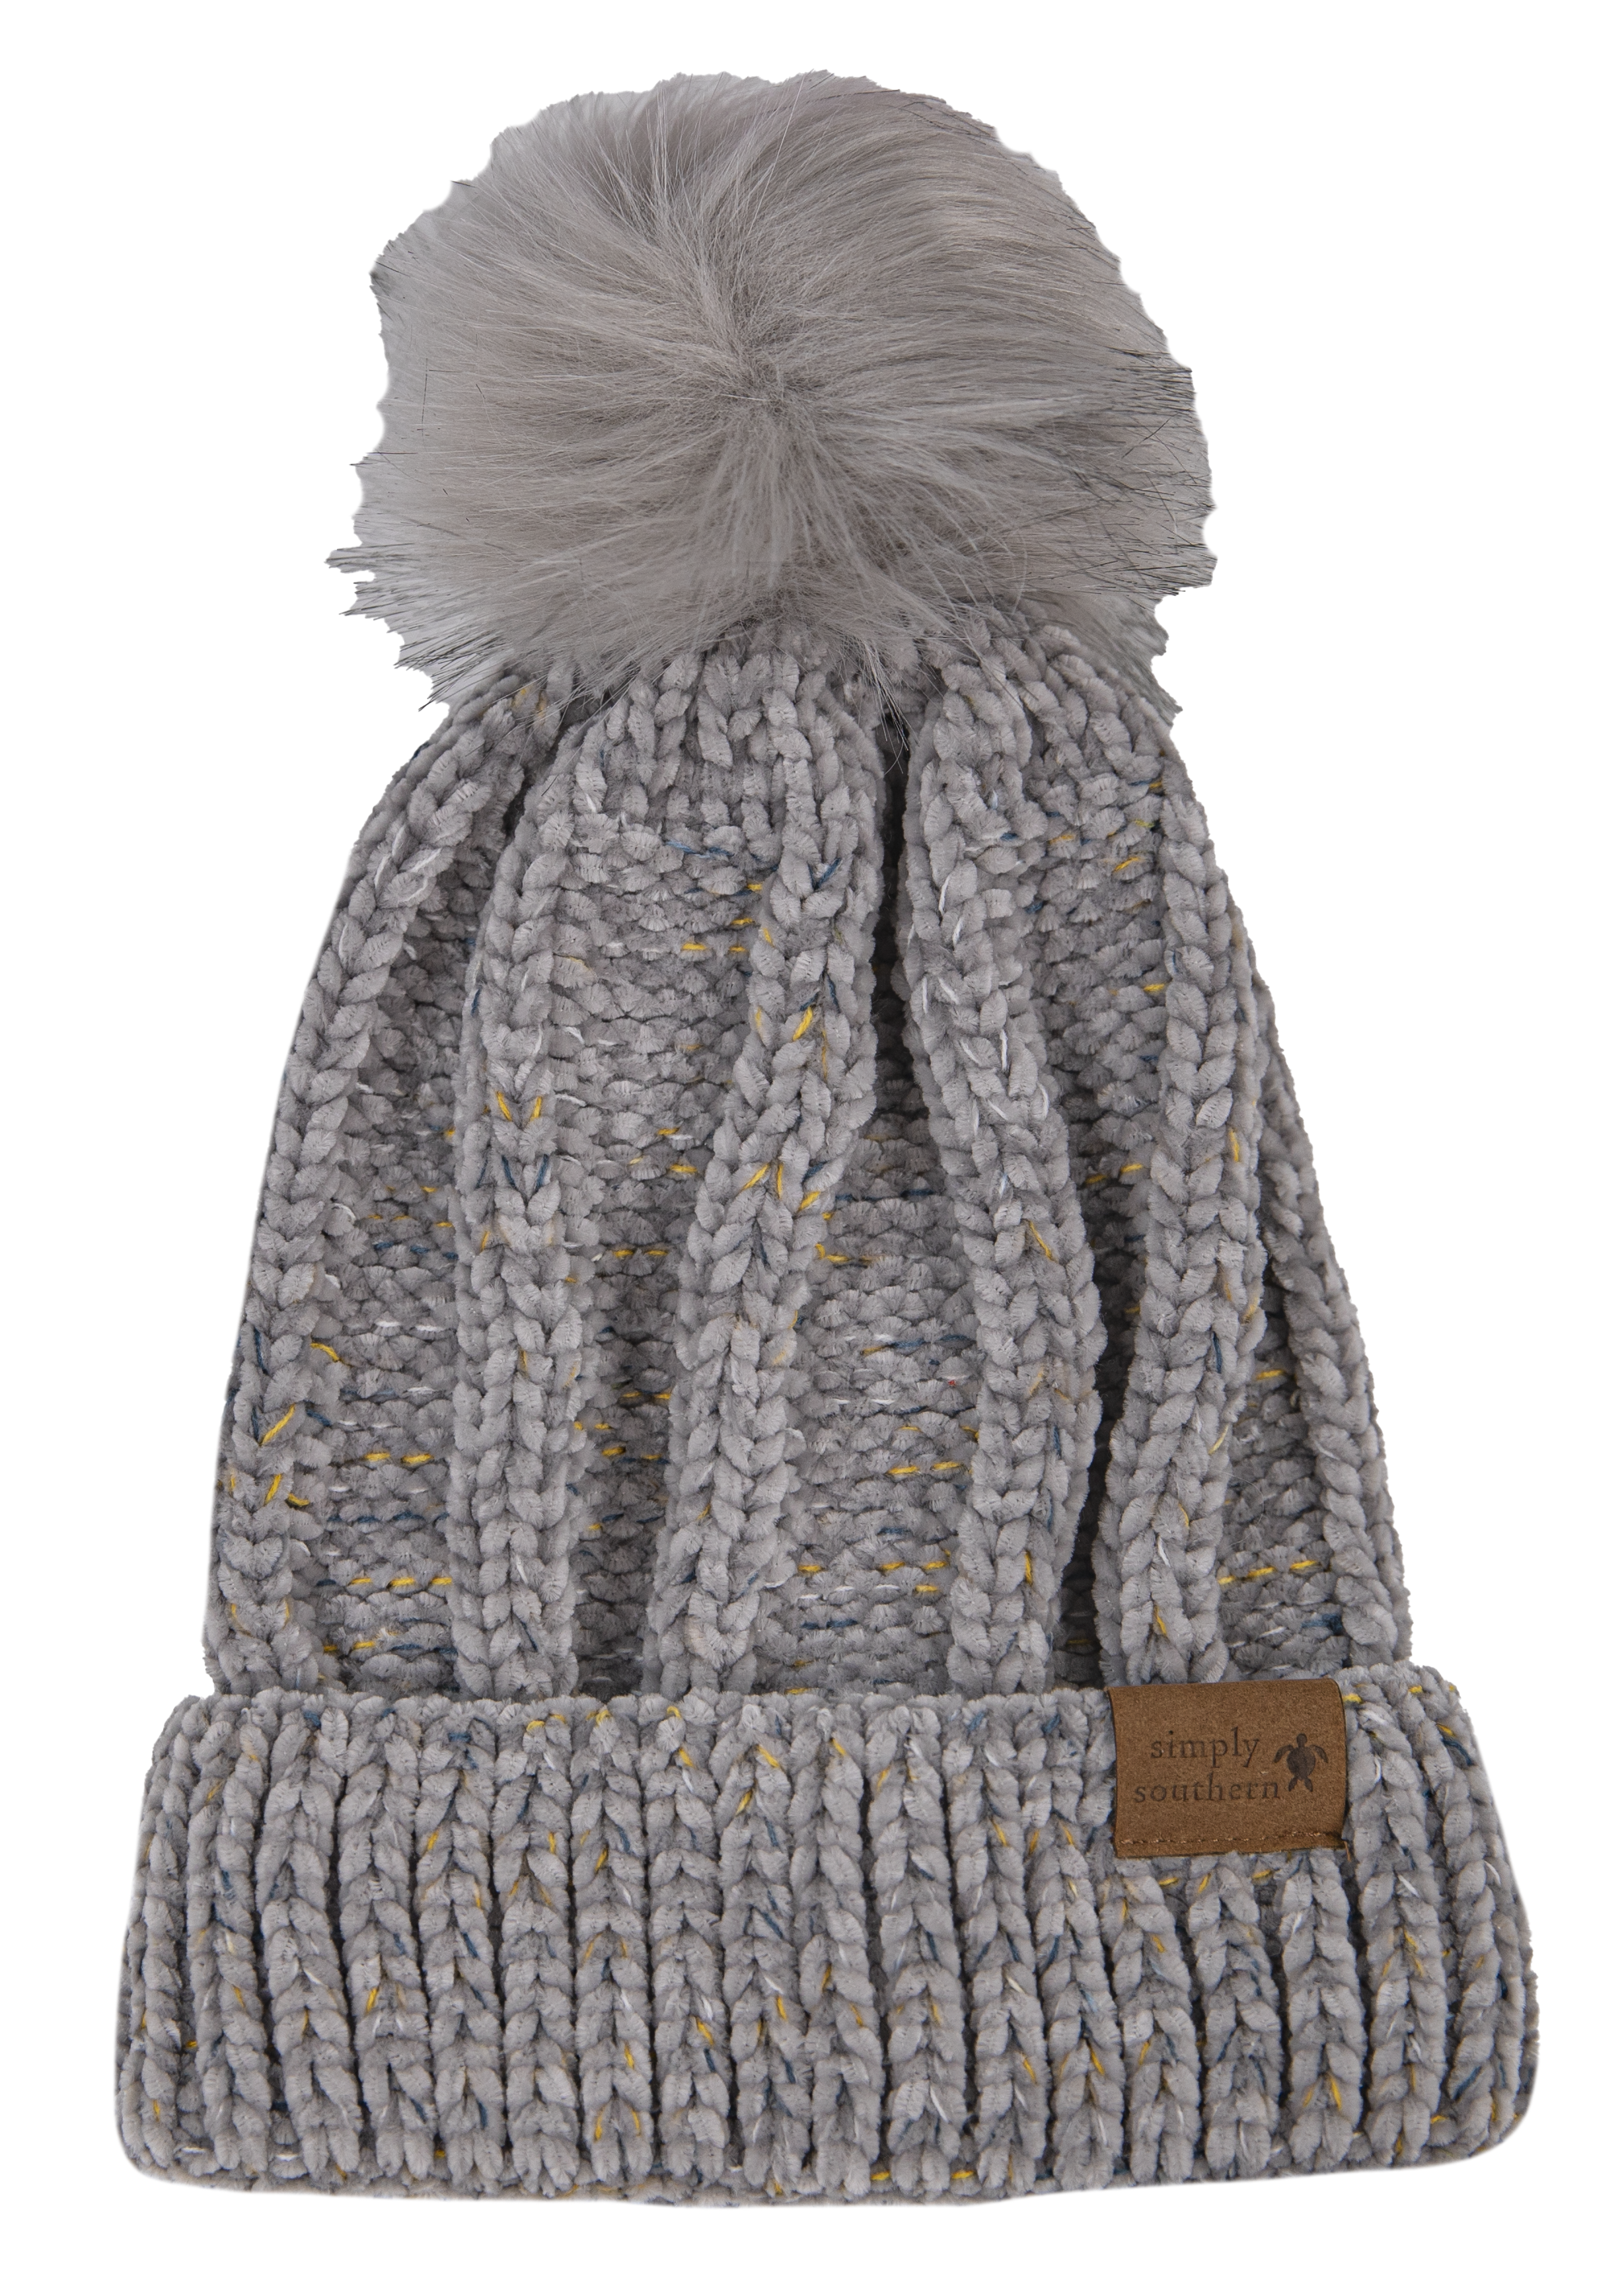 Simply Southern - Women's Chenille Beanie - Gray